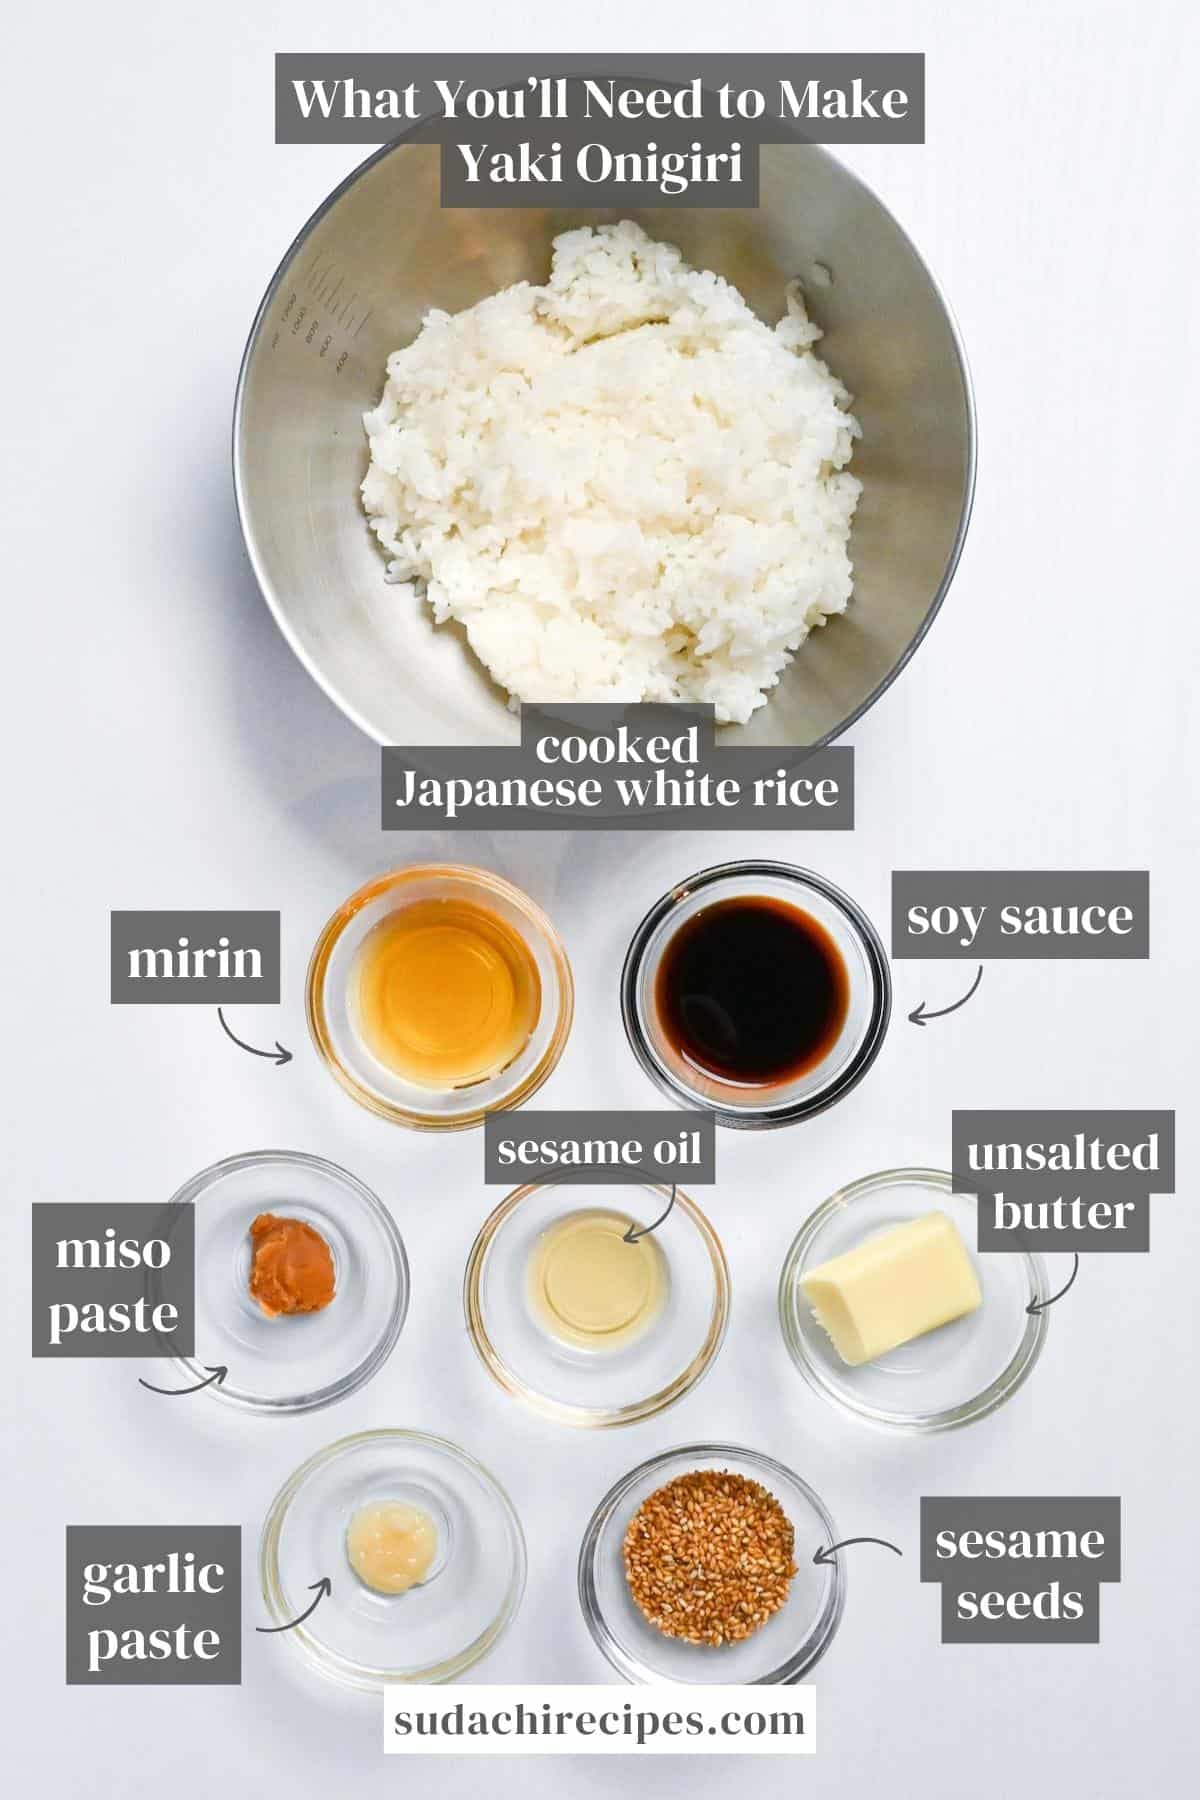 ingredients for yaki onigiri on a white background with labels